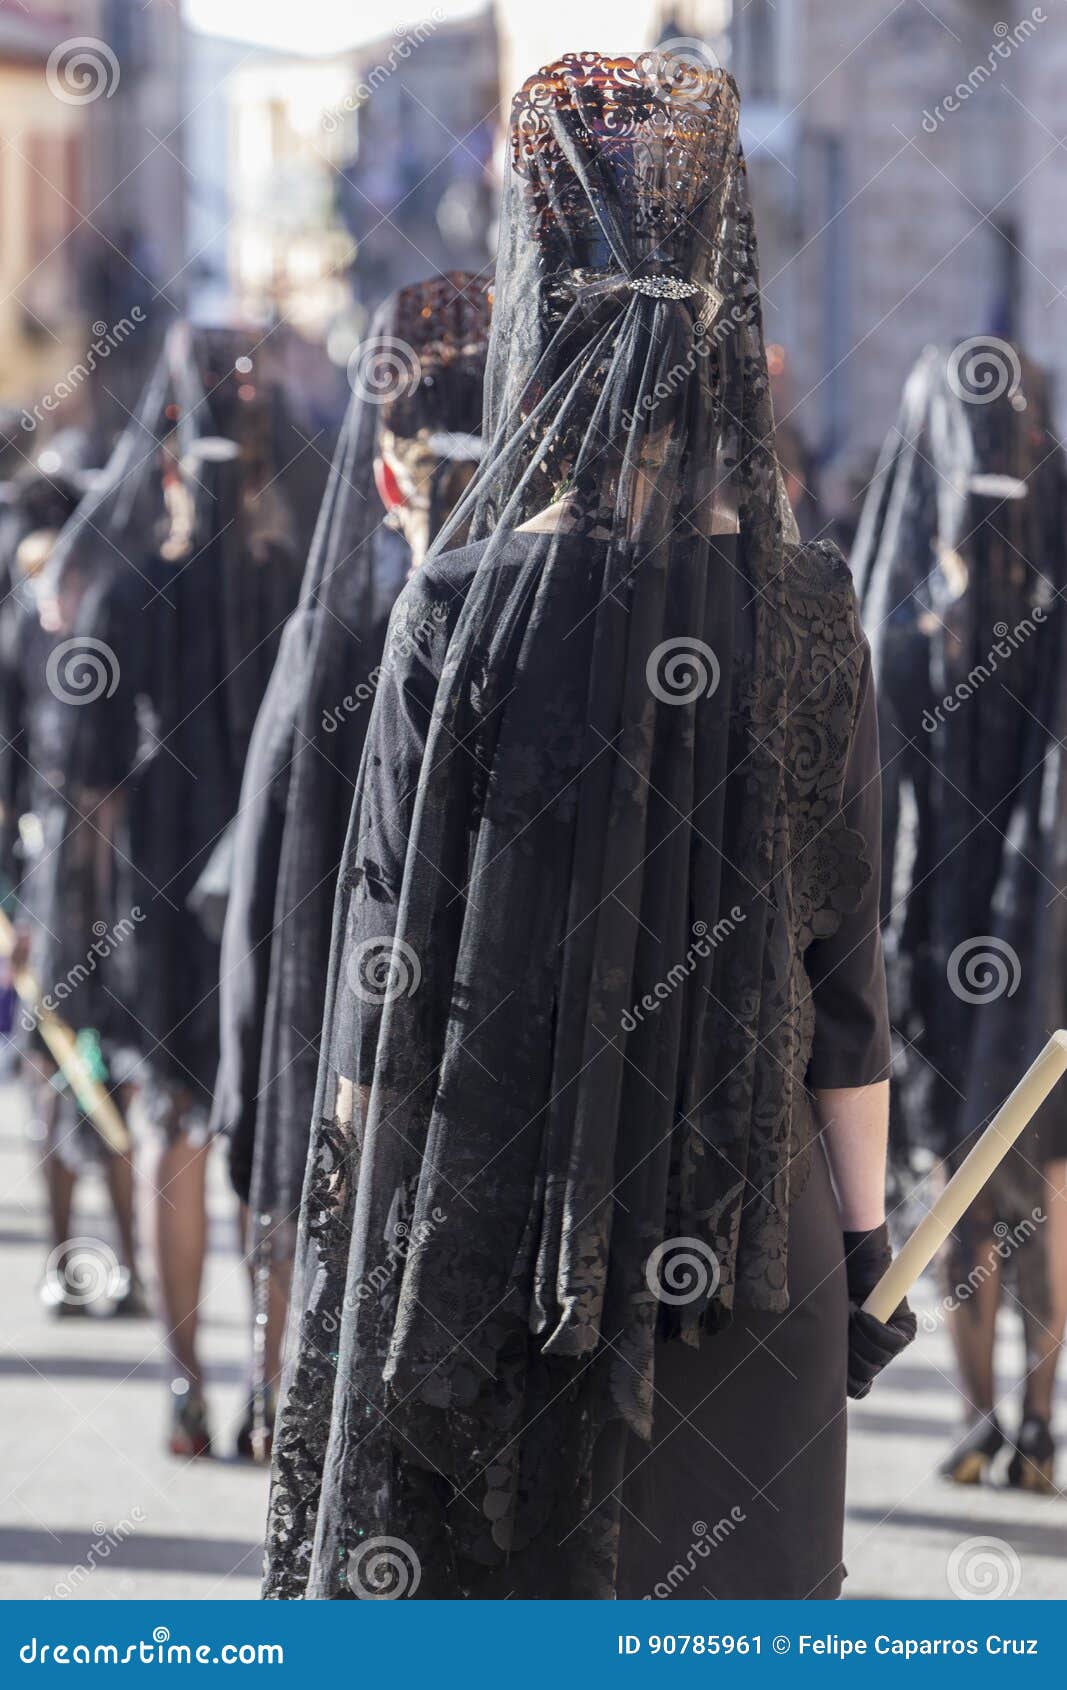 woman dressed in mantilla during a procession of holy week